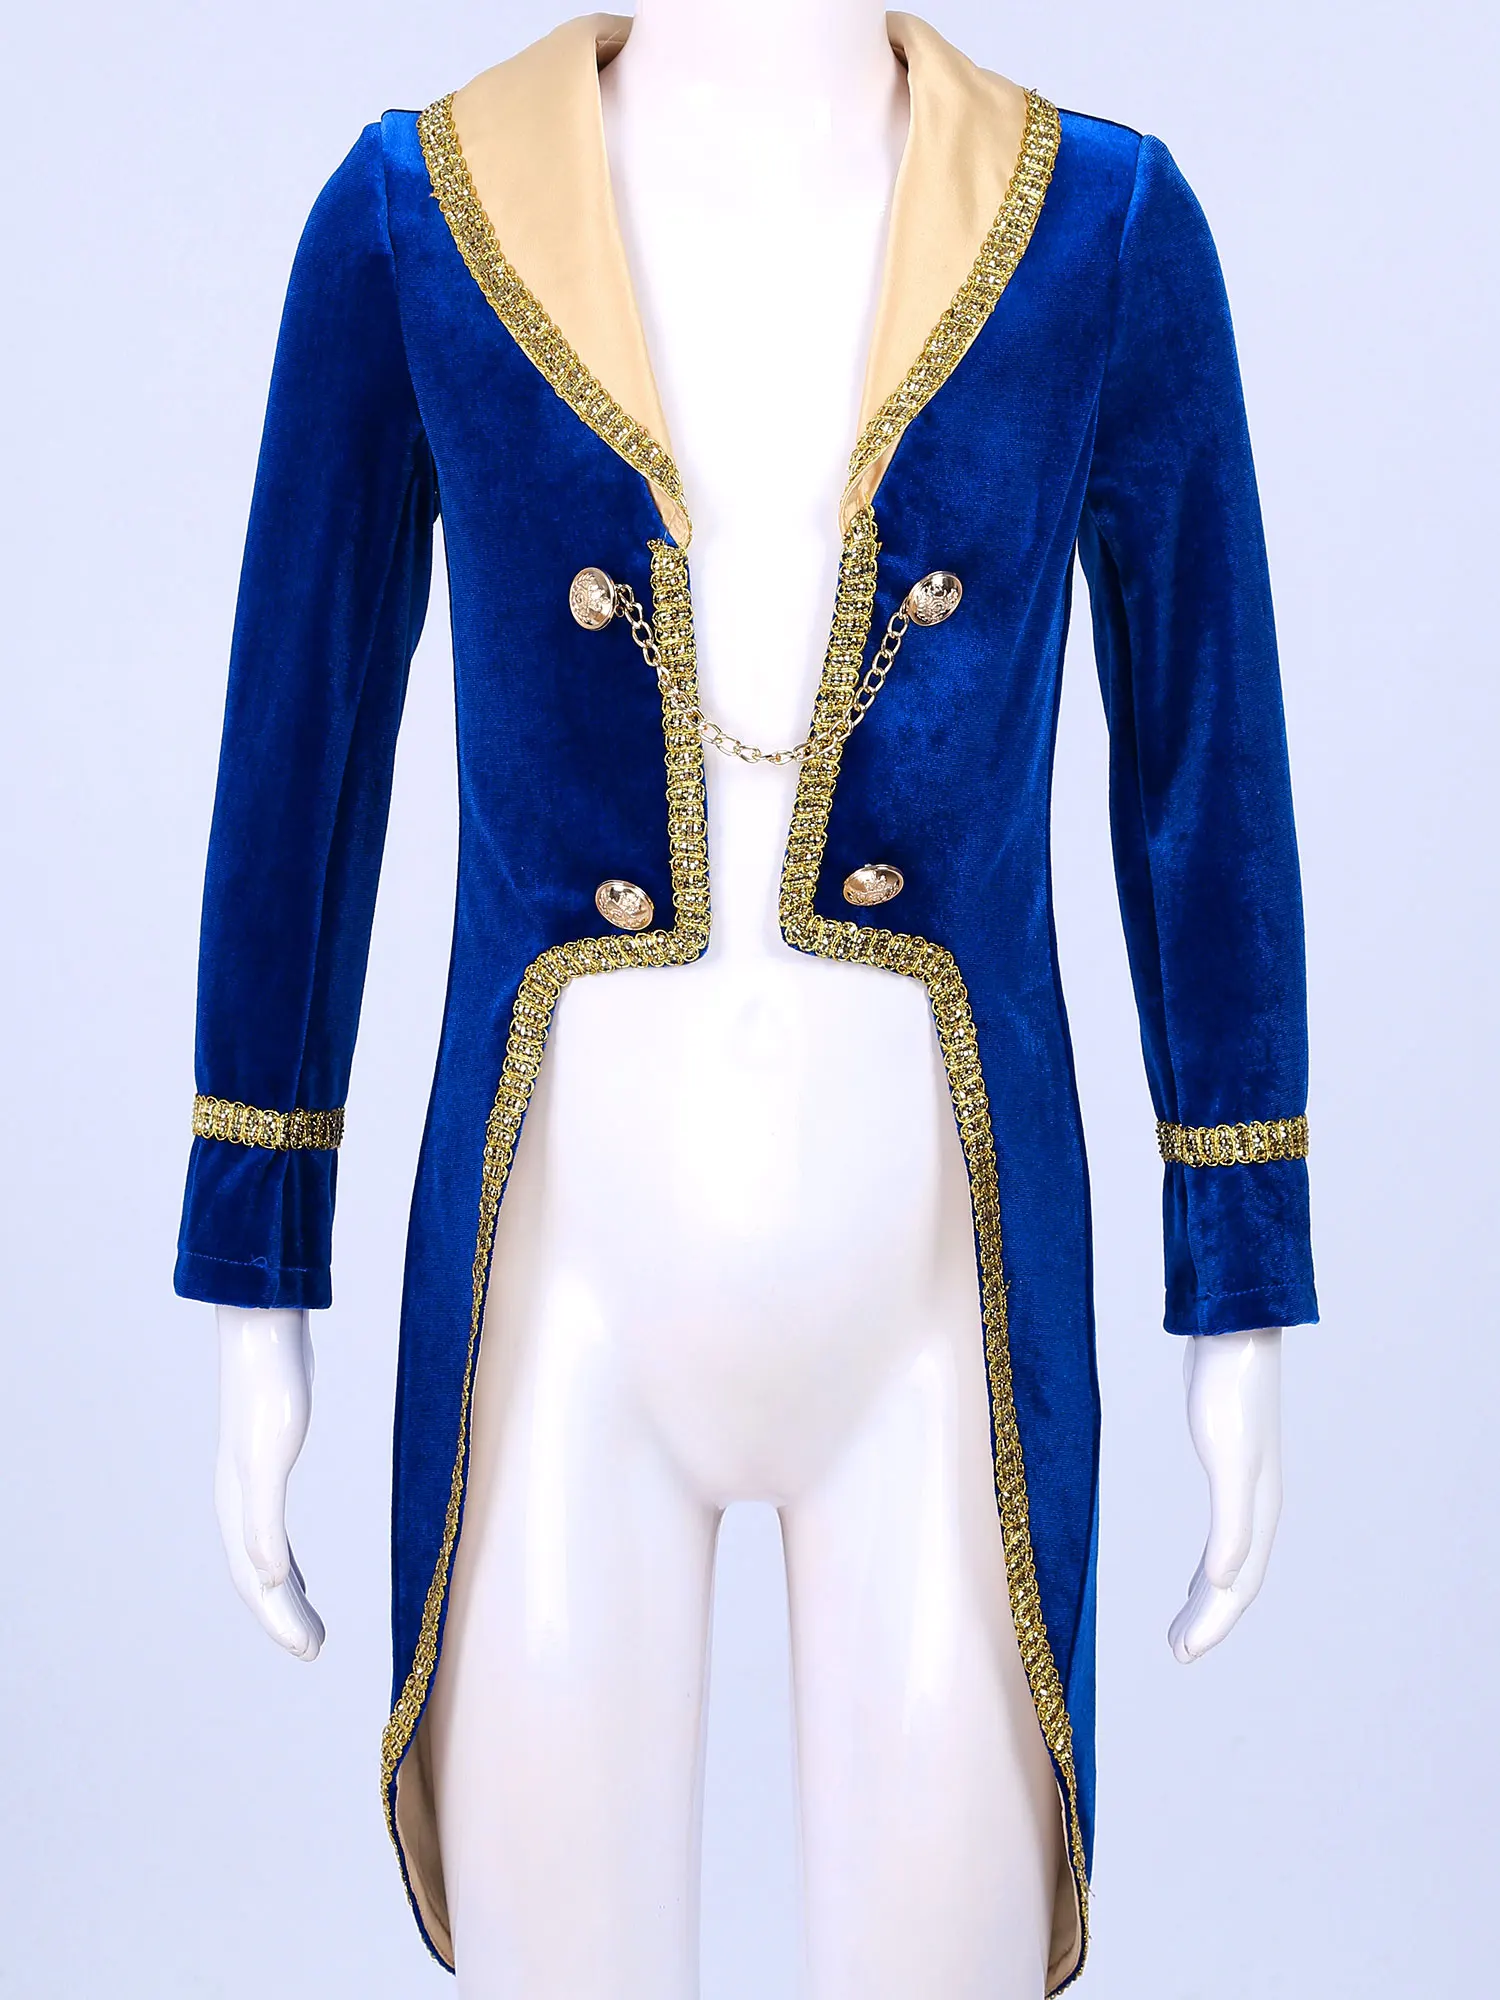 Royal Blue Kids Boys  Vintage Royal Court Prince Long Sleeves Tuxedo Coat Halloween Carnival Cosplay Costumes Roleplay Dress Up